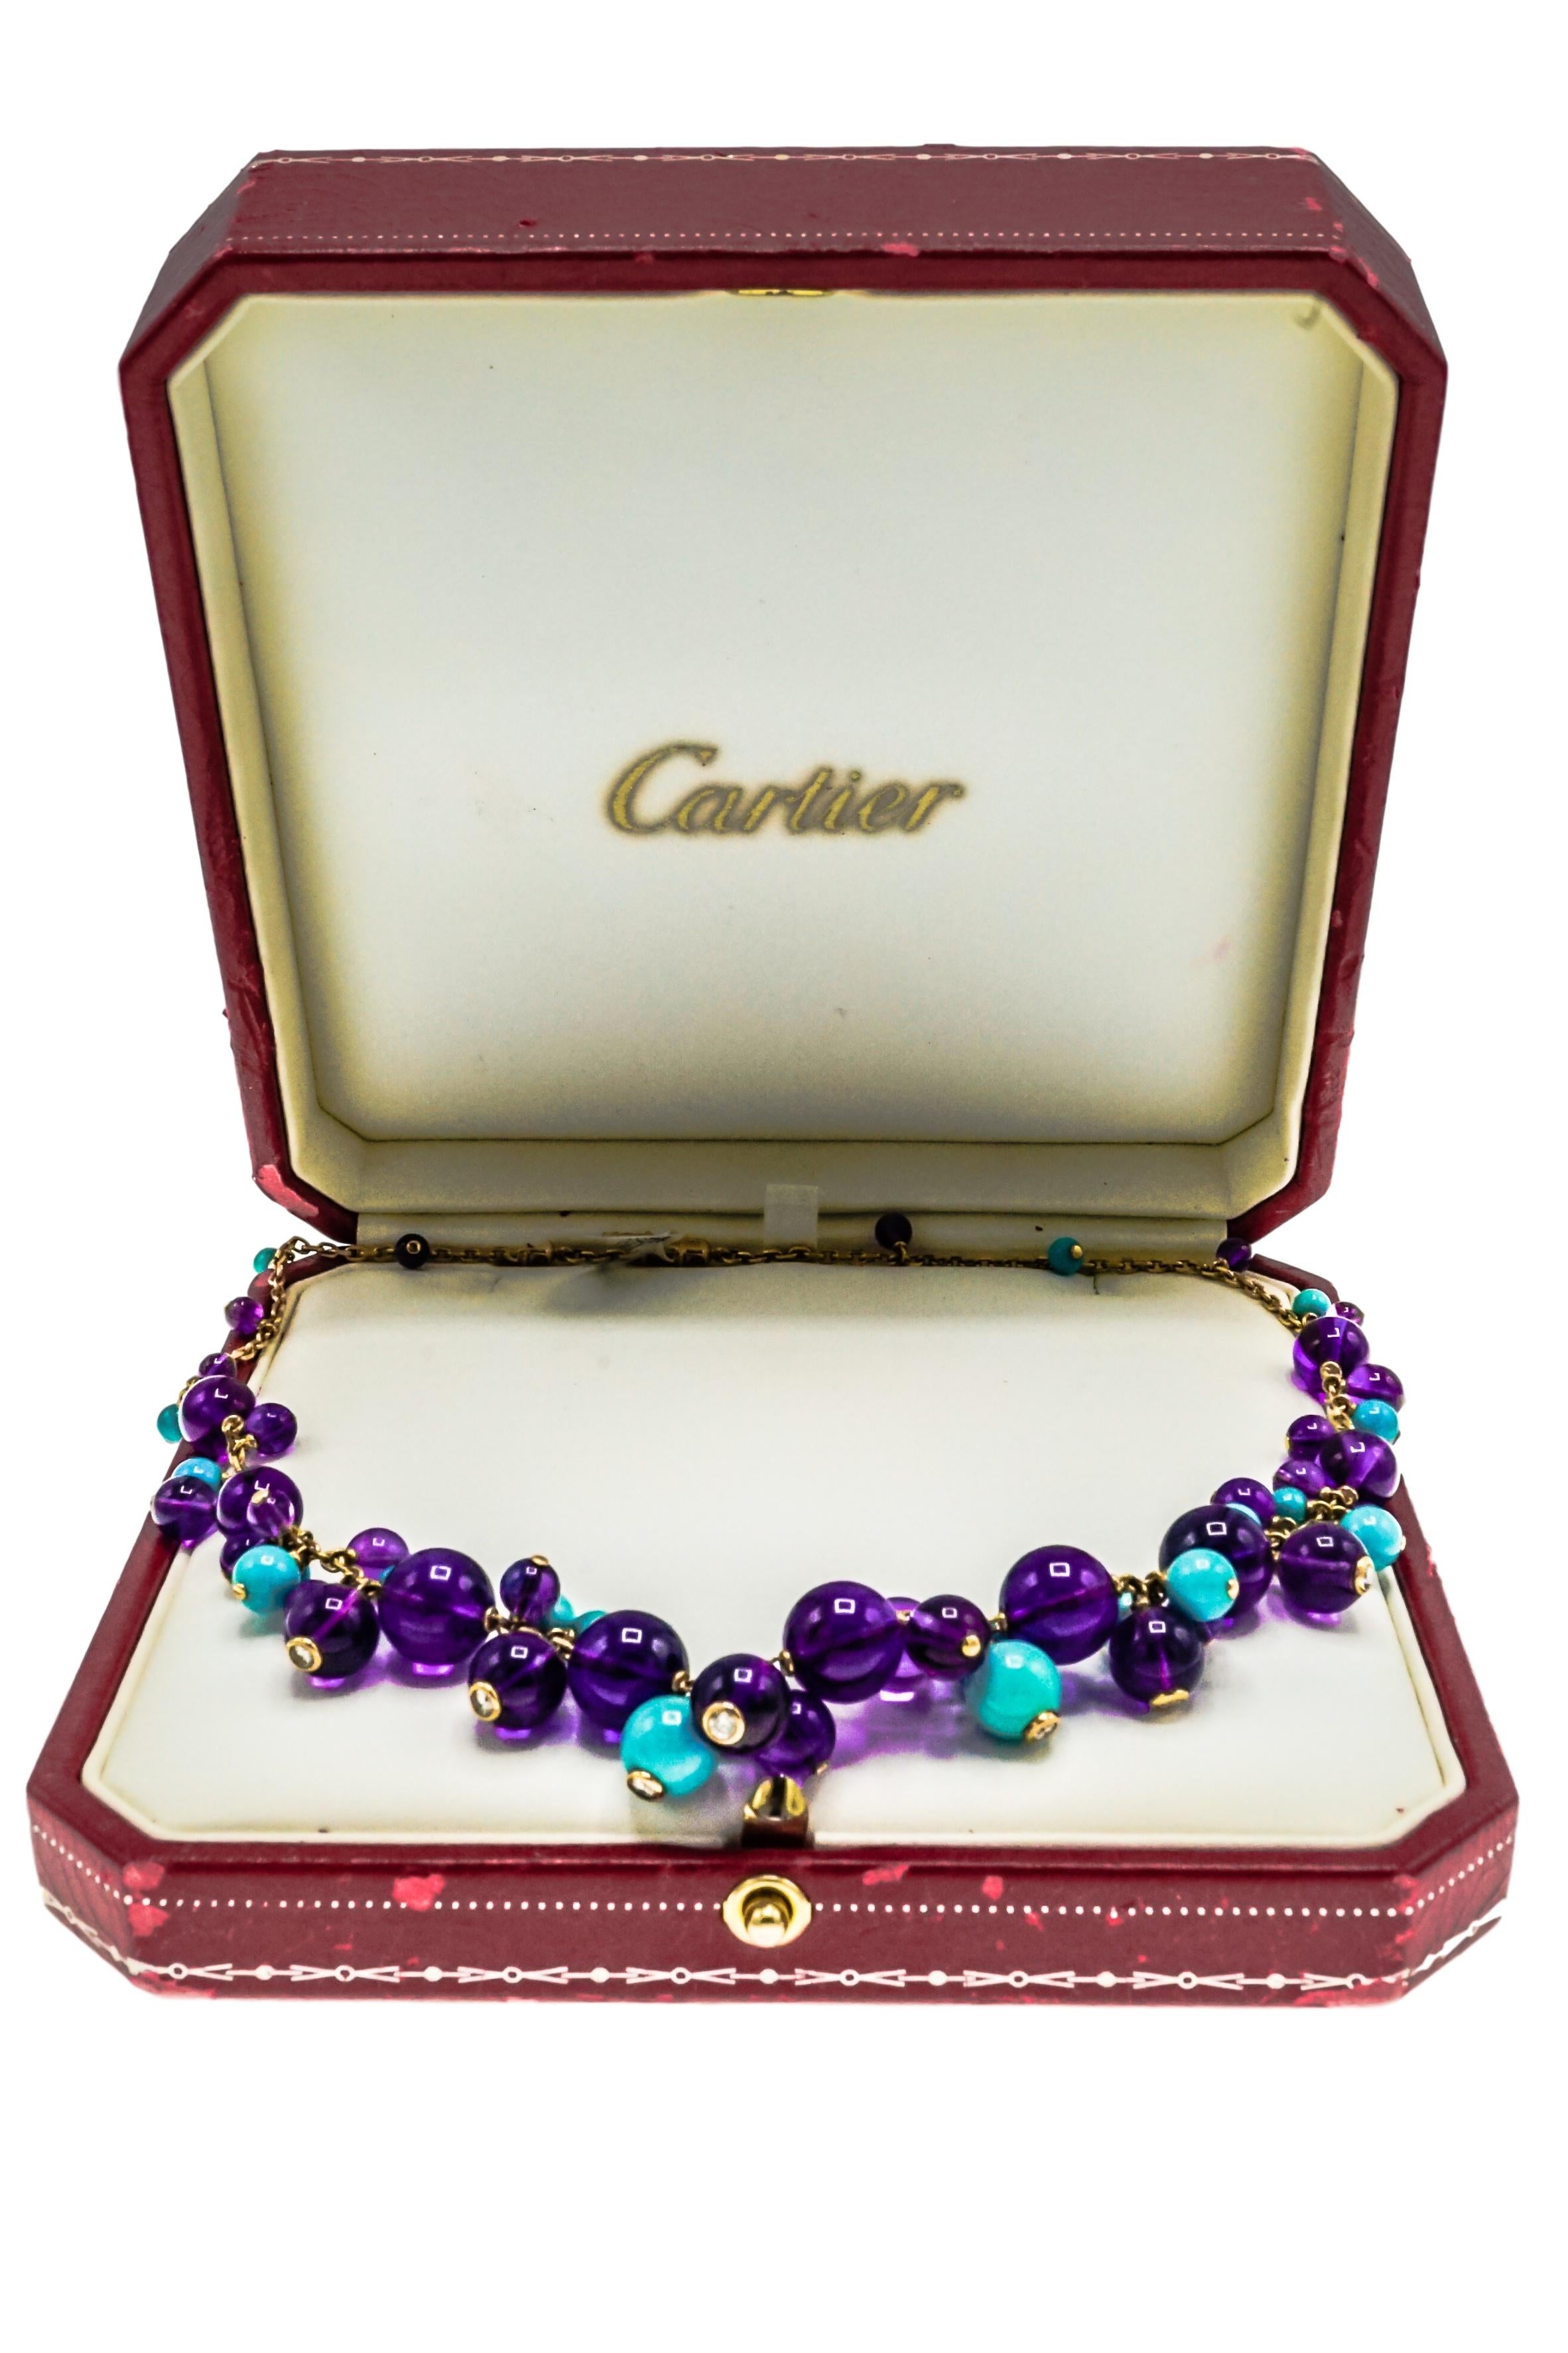 A Beautiful Cartier France Turquoise necklace, featuring clusters of turquoise beads measuring approximately 9.0 to 4.0 mm and amethyst beads measuring approximately 10.1 to 4.1 mm, accented by round diamonds, with a length 14⅝ inches, this piece is